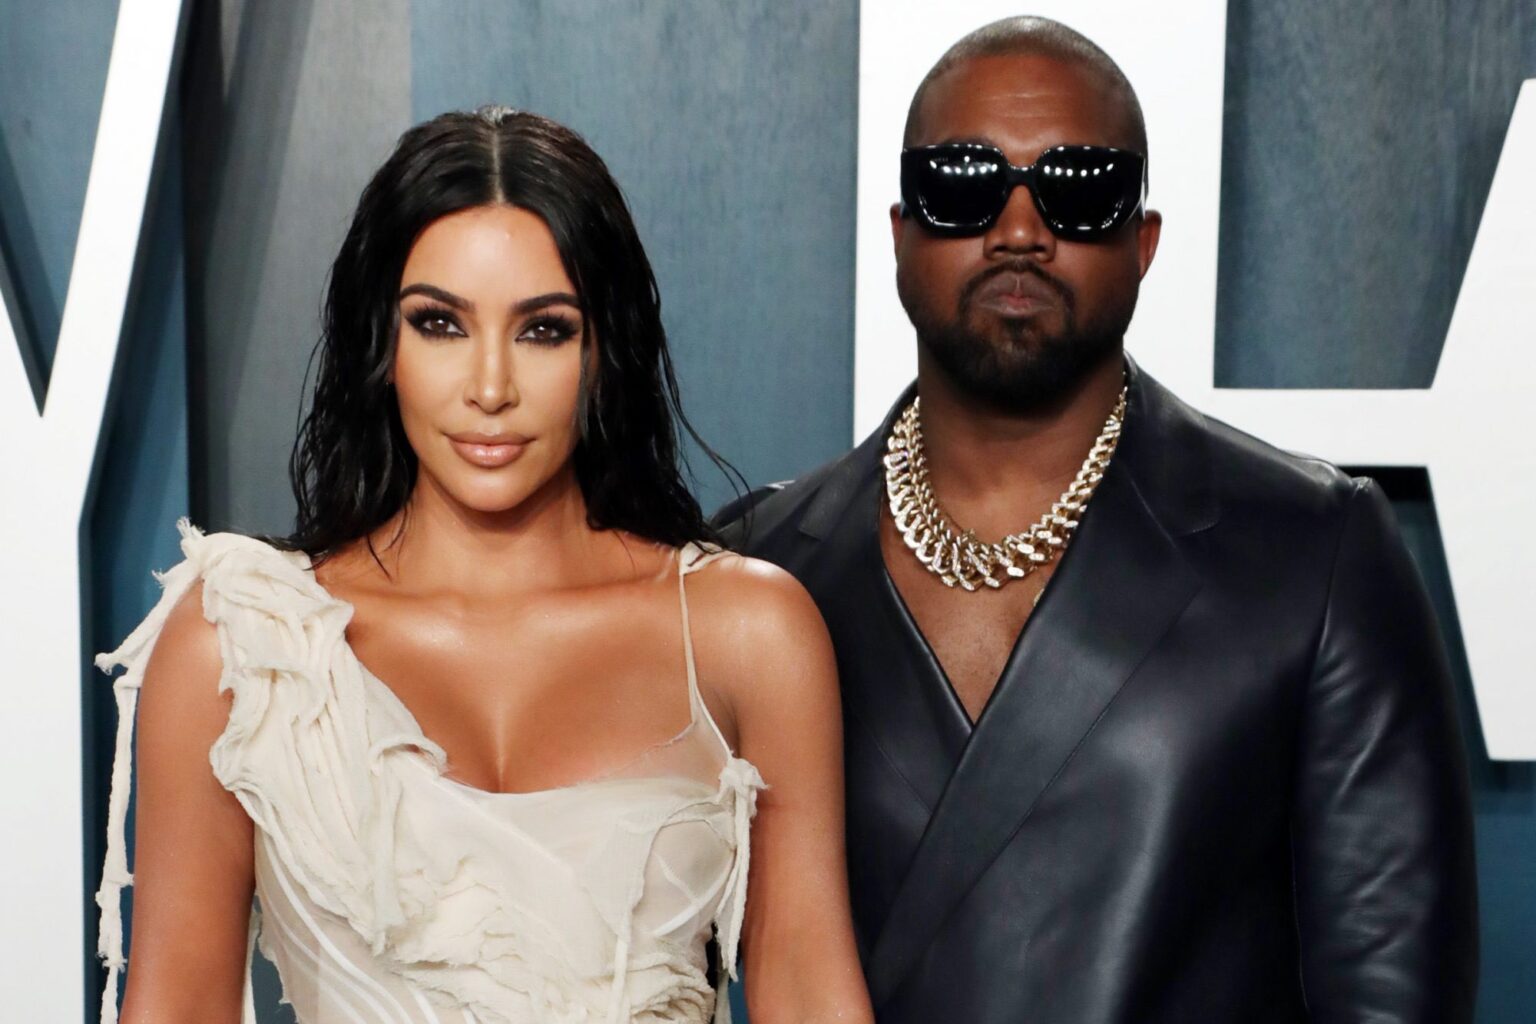 Kanye West is making waves with 'Donda', but what about Kim? Rip open the story and see how the famous couple's divorce is addressed on Kanye's new album.